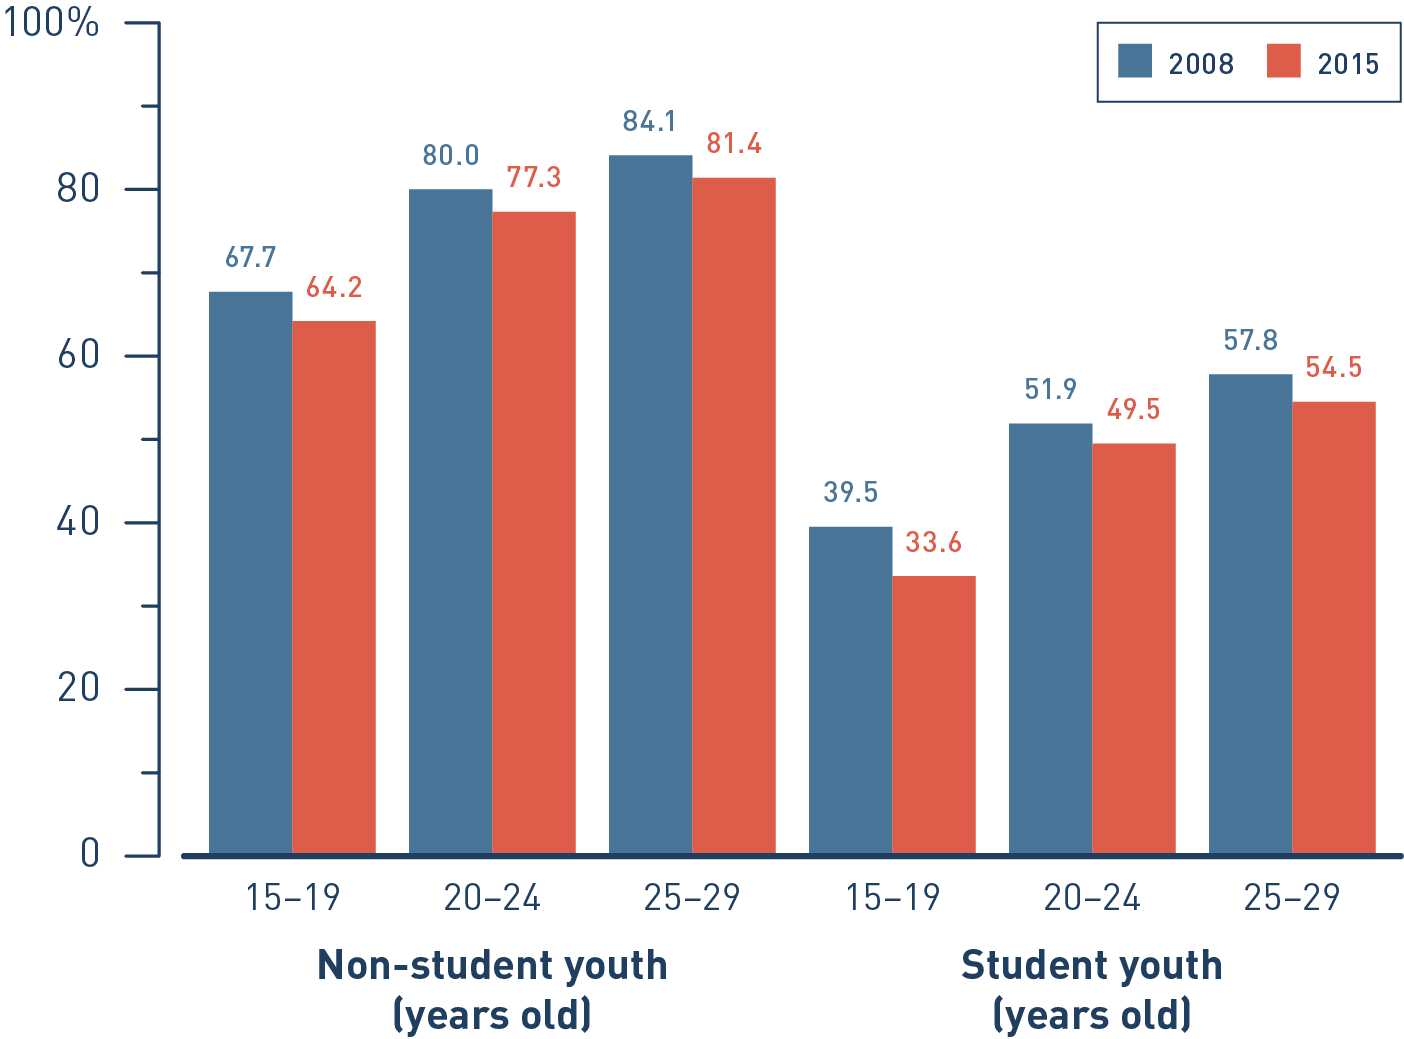 Non-student and student youth employment rates by age group, 2008 and 2015: description follows